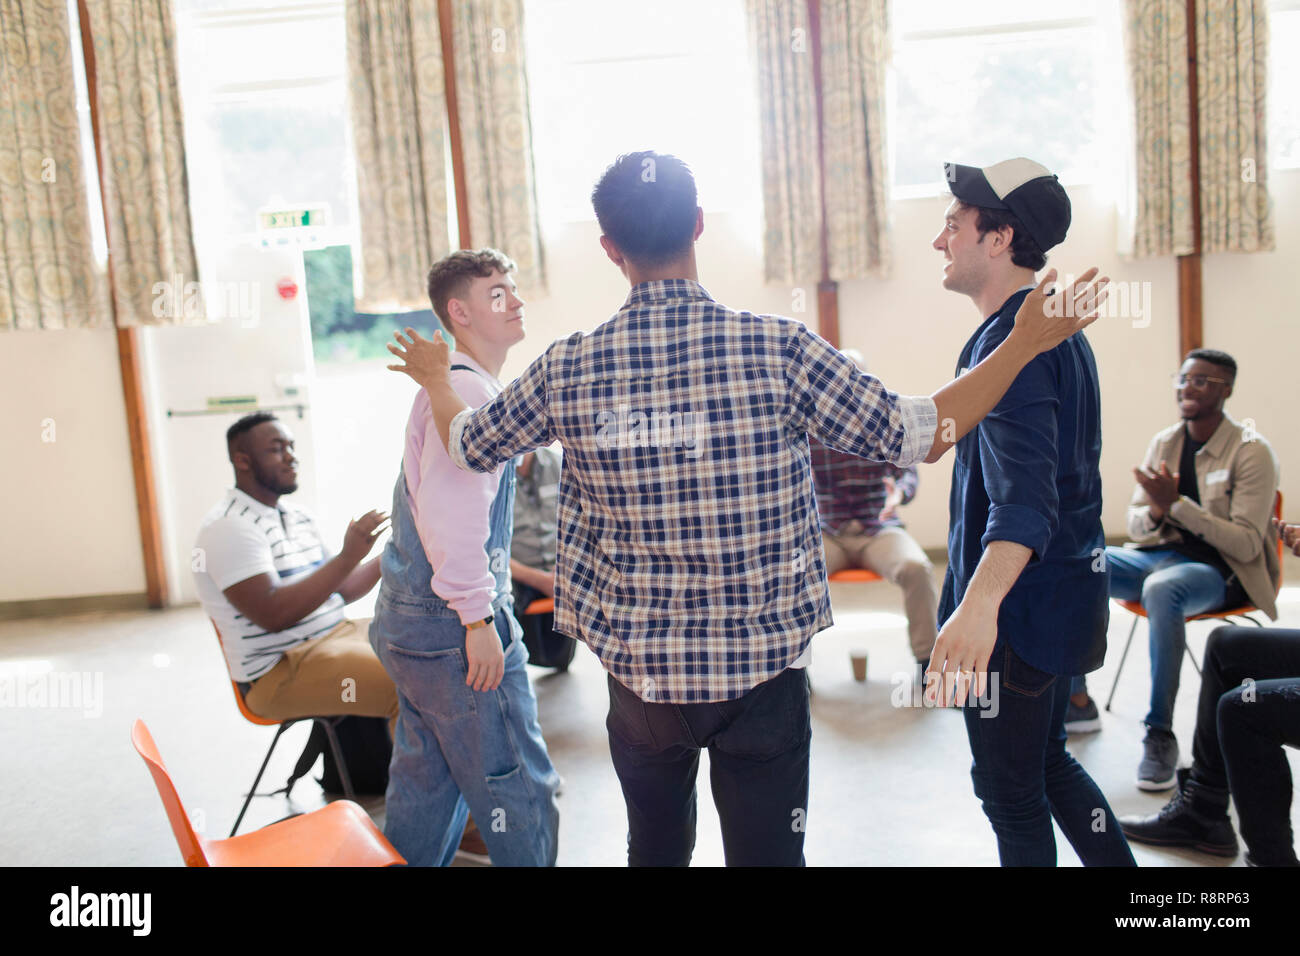 Men talking and clapping in group therapy in community center Stock Photo